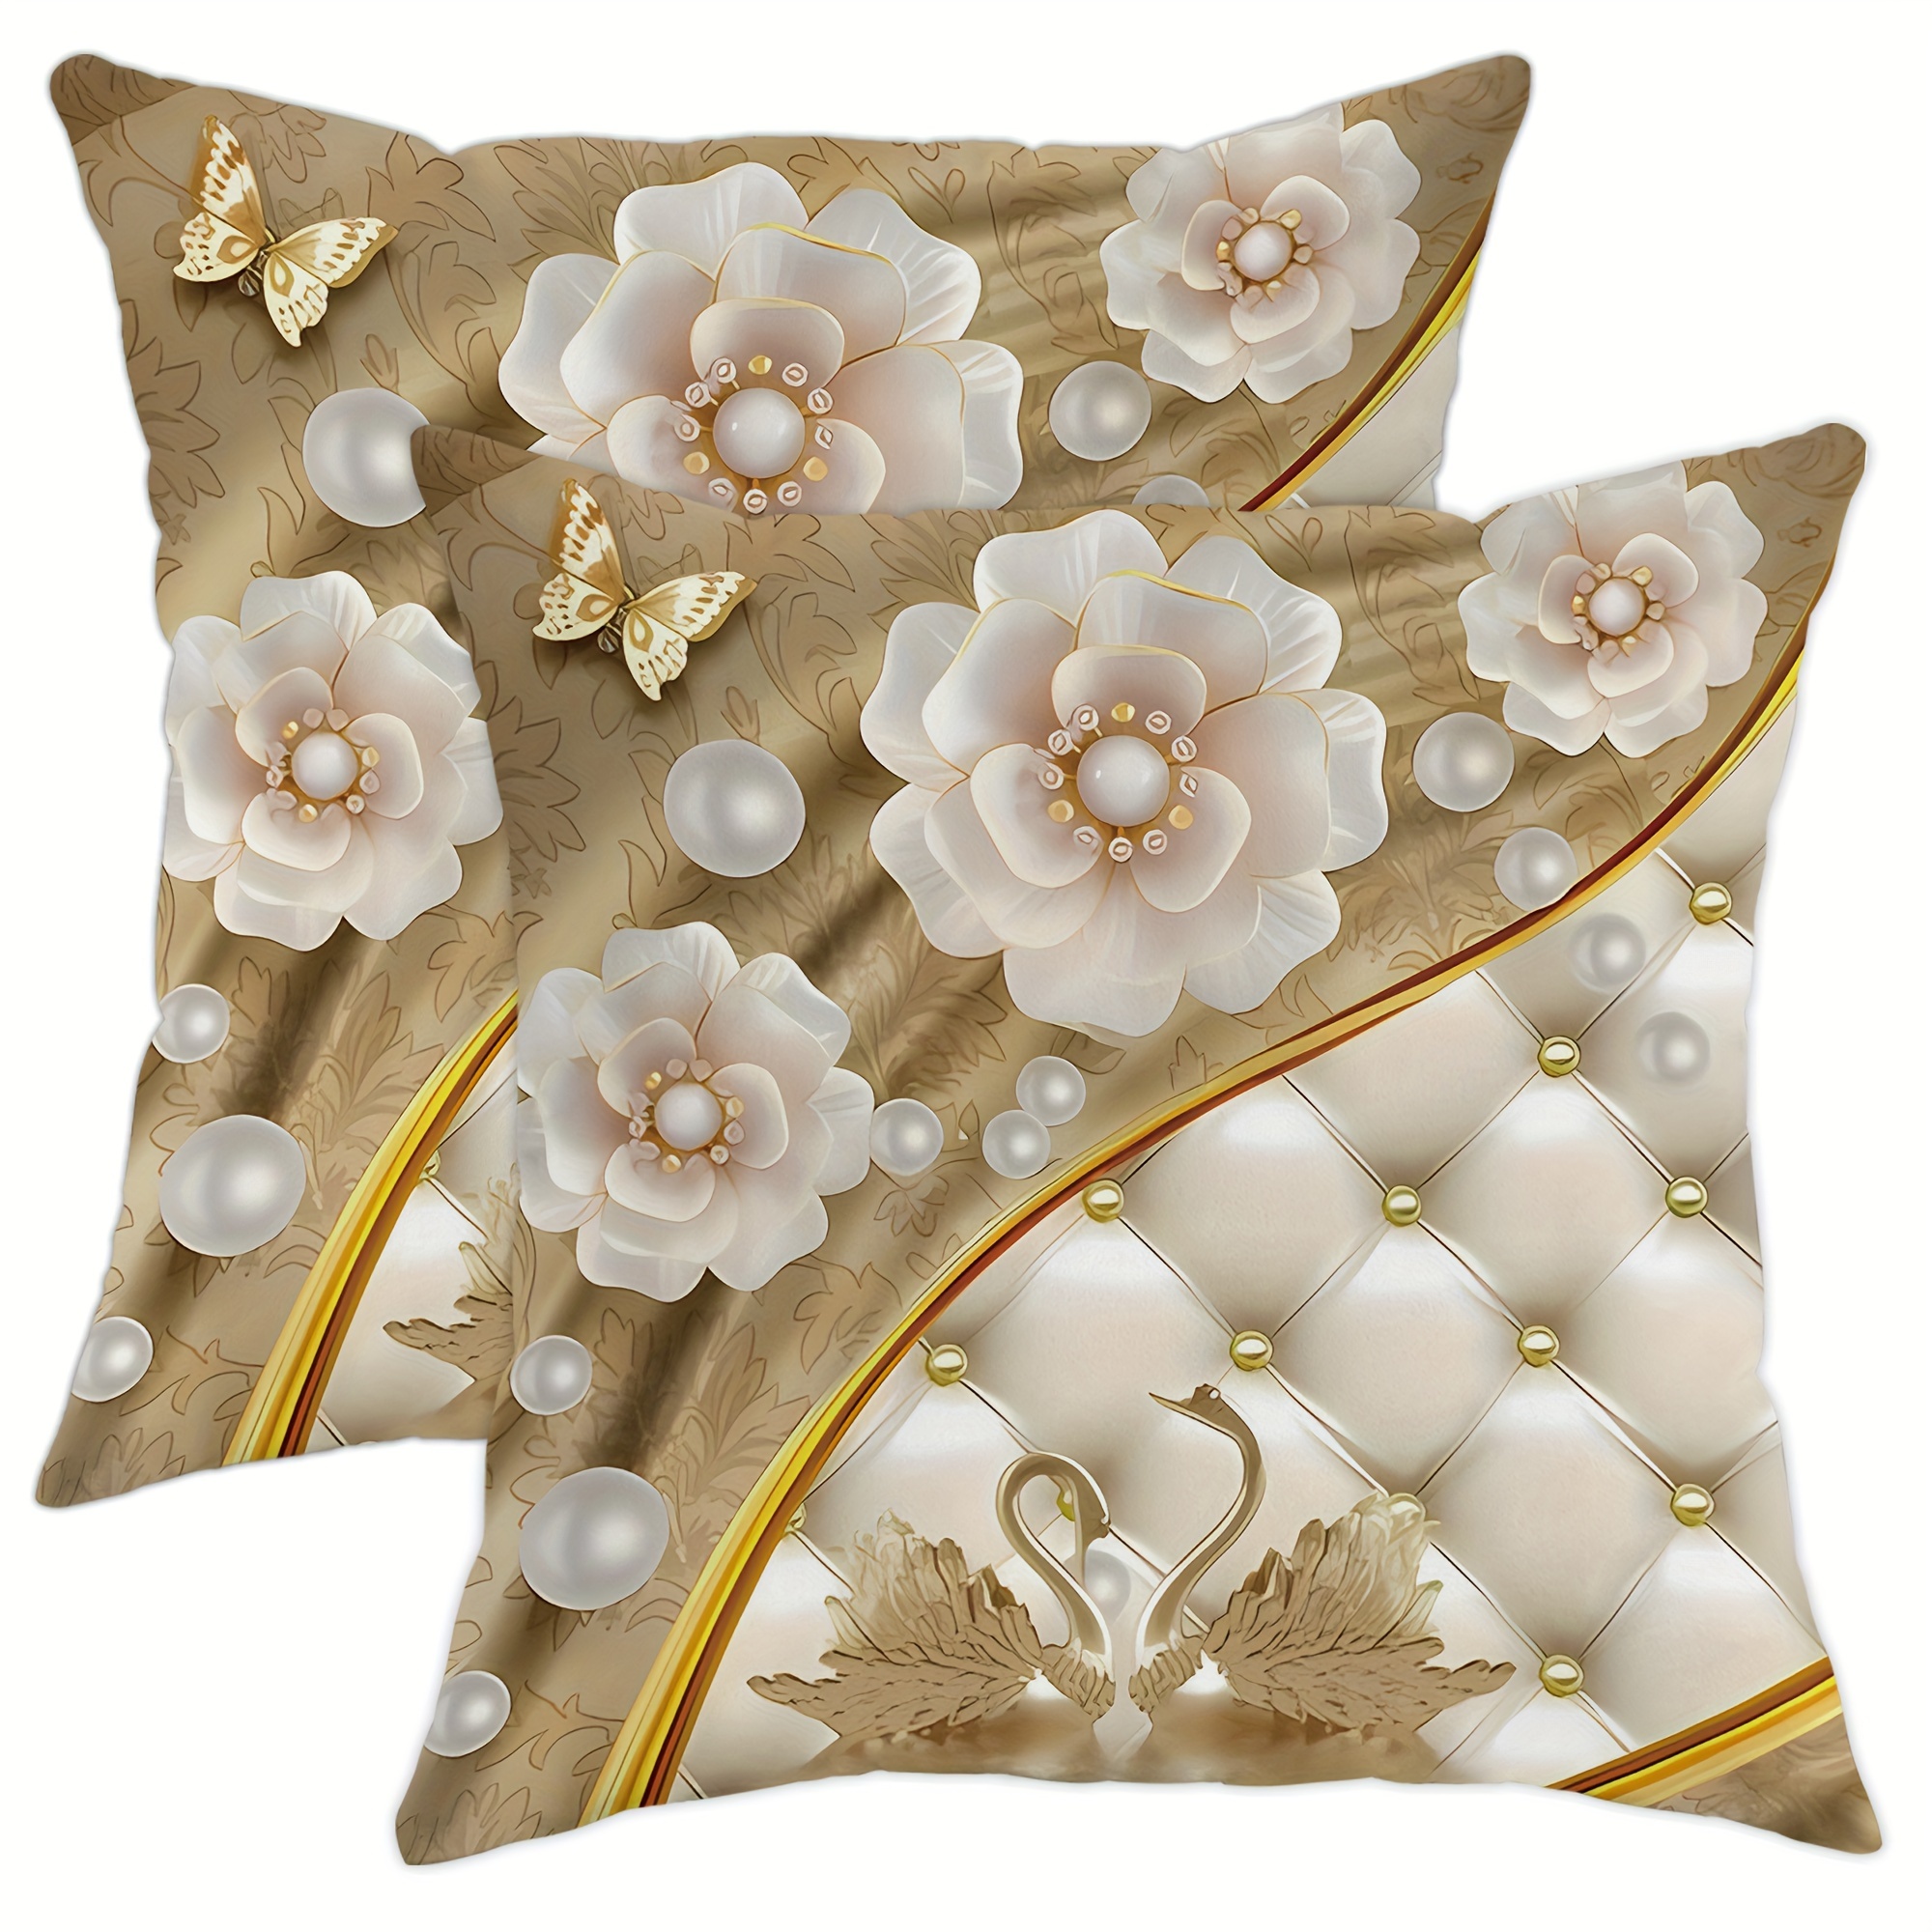 

2pcs, Velvet Throw Pillow Covers 3d Floral Gorgeous Valance White Gold Decorative Pillow Covers 18*18 Inch Suitable For Summer And Autumn Living Room Bedroom Sofa Bed Decoration